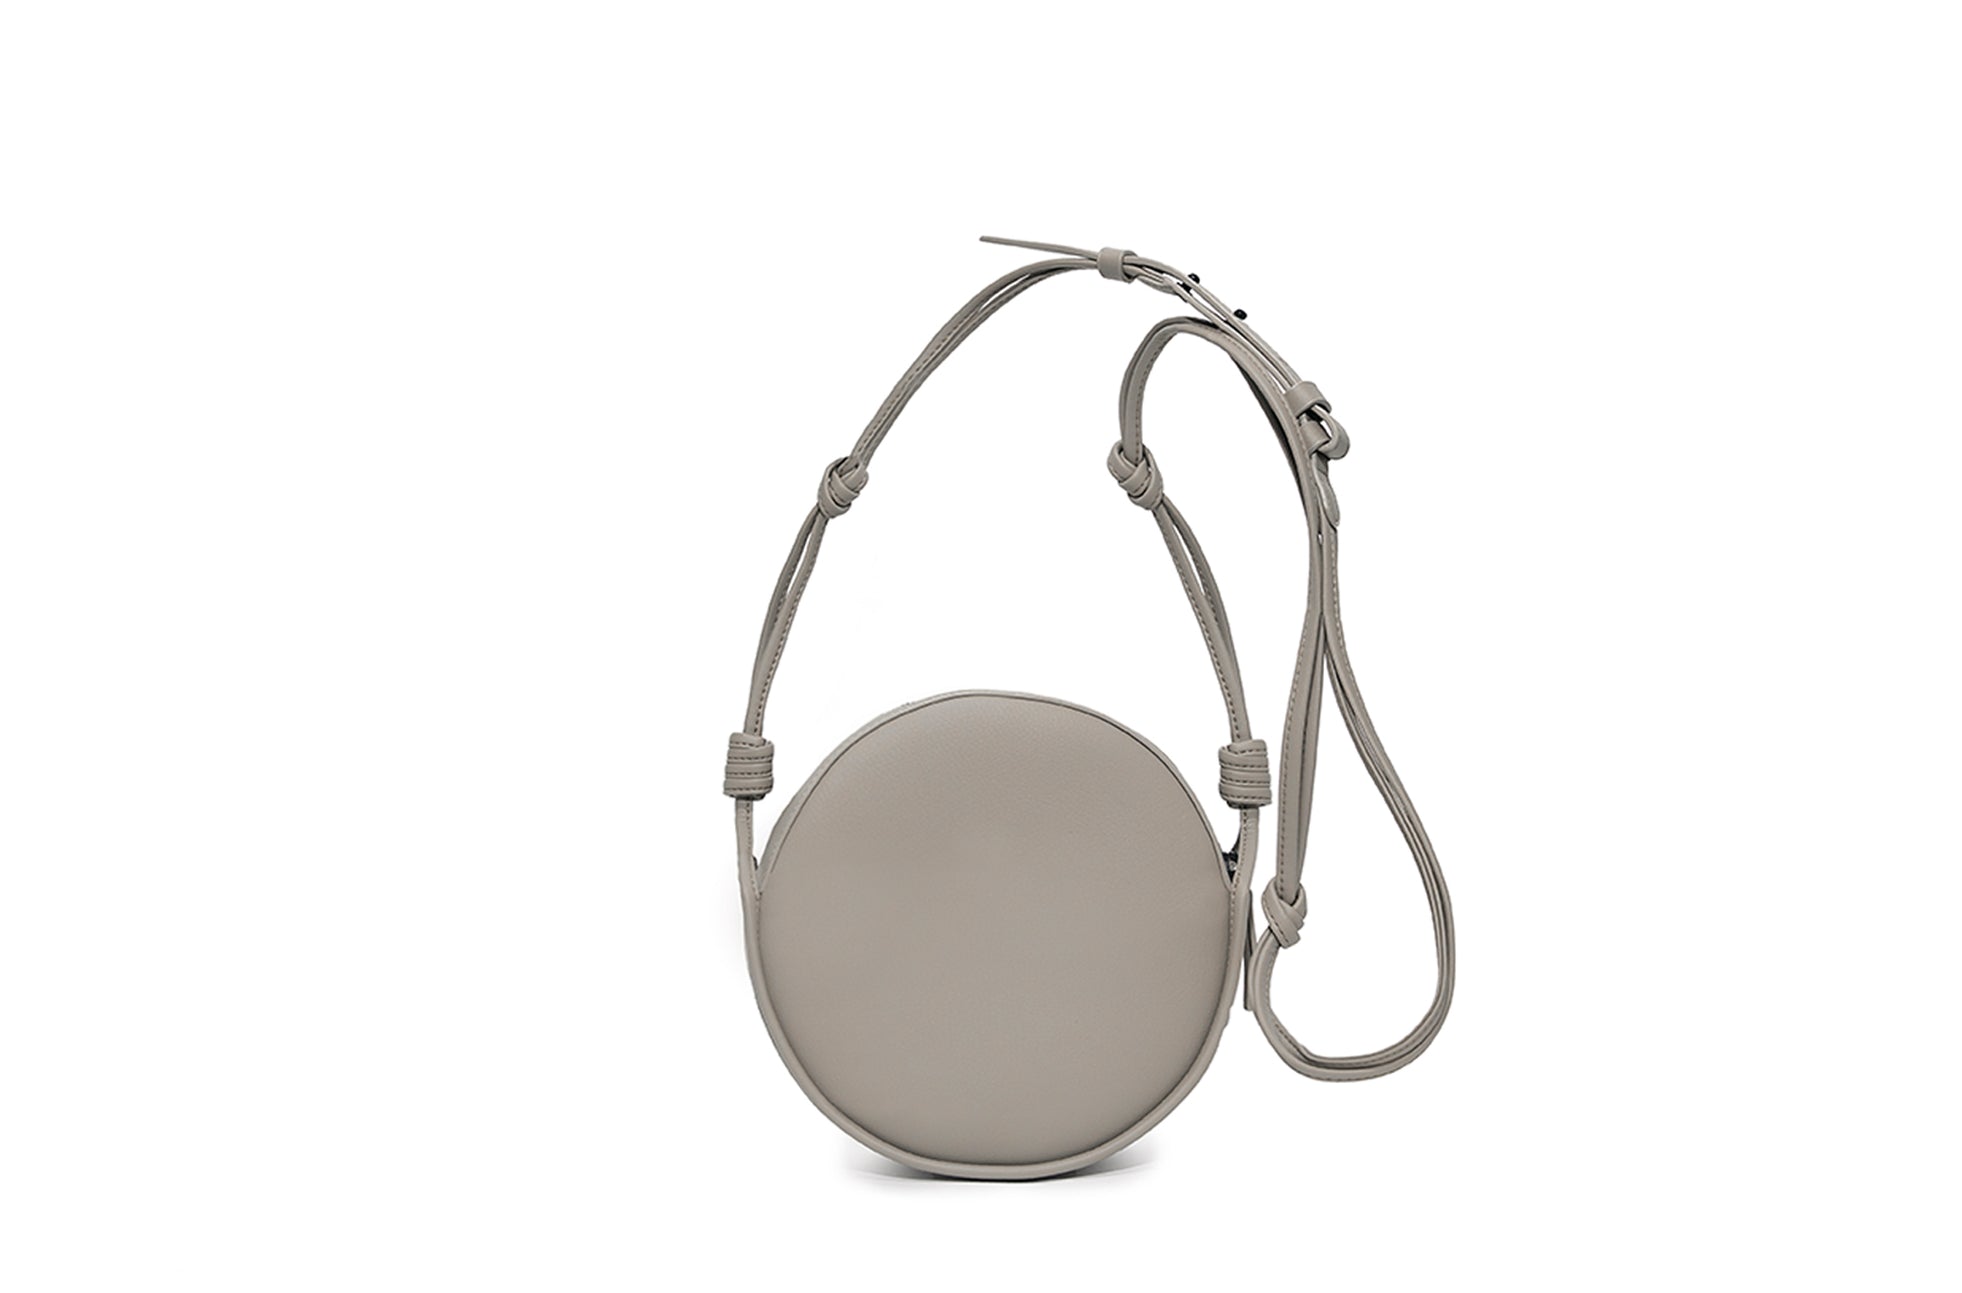 The Circle Crossbody in Banbū Leather in Stone image 4